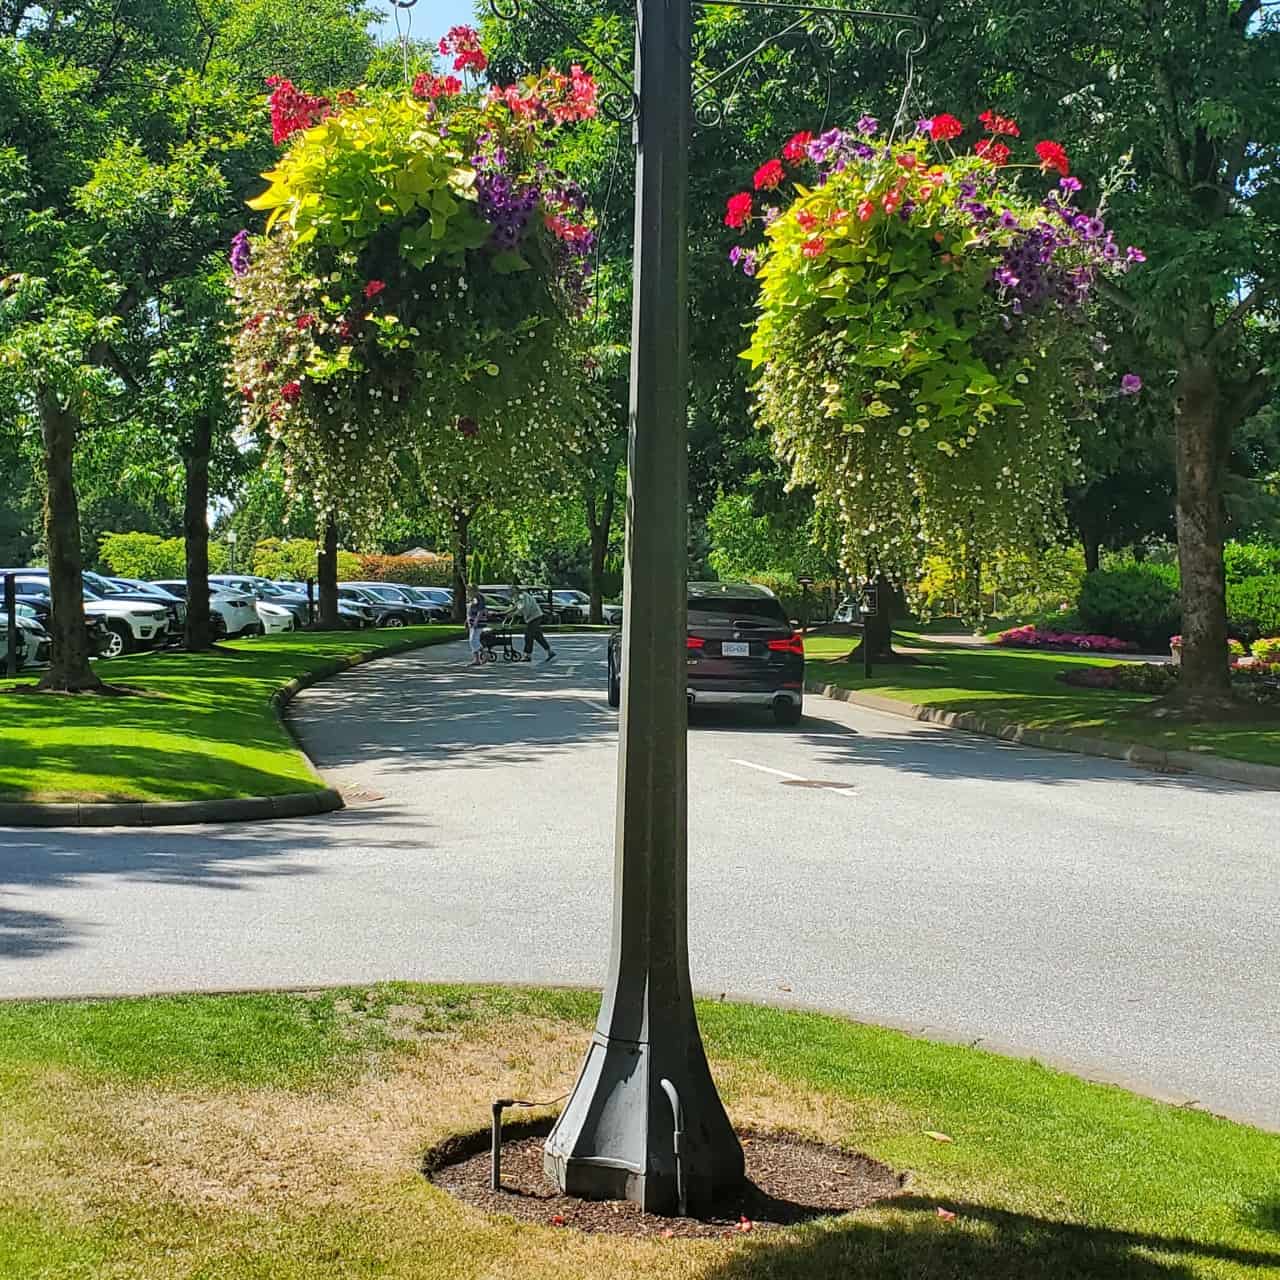 Hanging baskets outside Northview Golf Course - The hanging baskets are a welcoming feature when heading to Duffey's Sports Grill in Surrey BC.